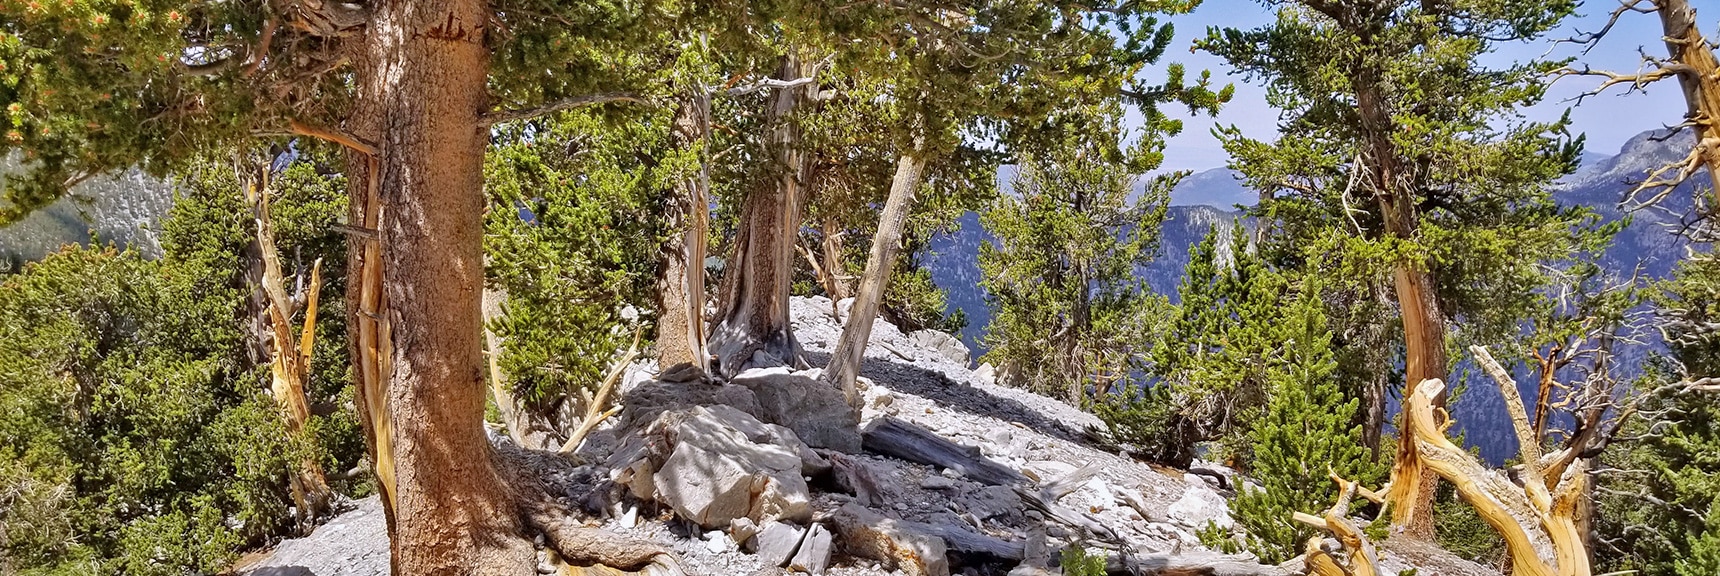 Bristlecone Pine Forest at the Summit of the "Horrifying Half-Mile" Avalanche Slope - North Ridge of Kyle Canyon | Mummy Mountain NW Cliffs | Mt Charleston Wilderness | Spring Mountains, Nevada